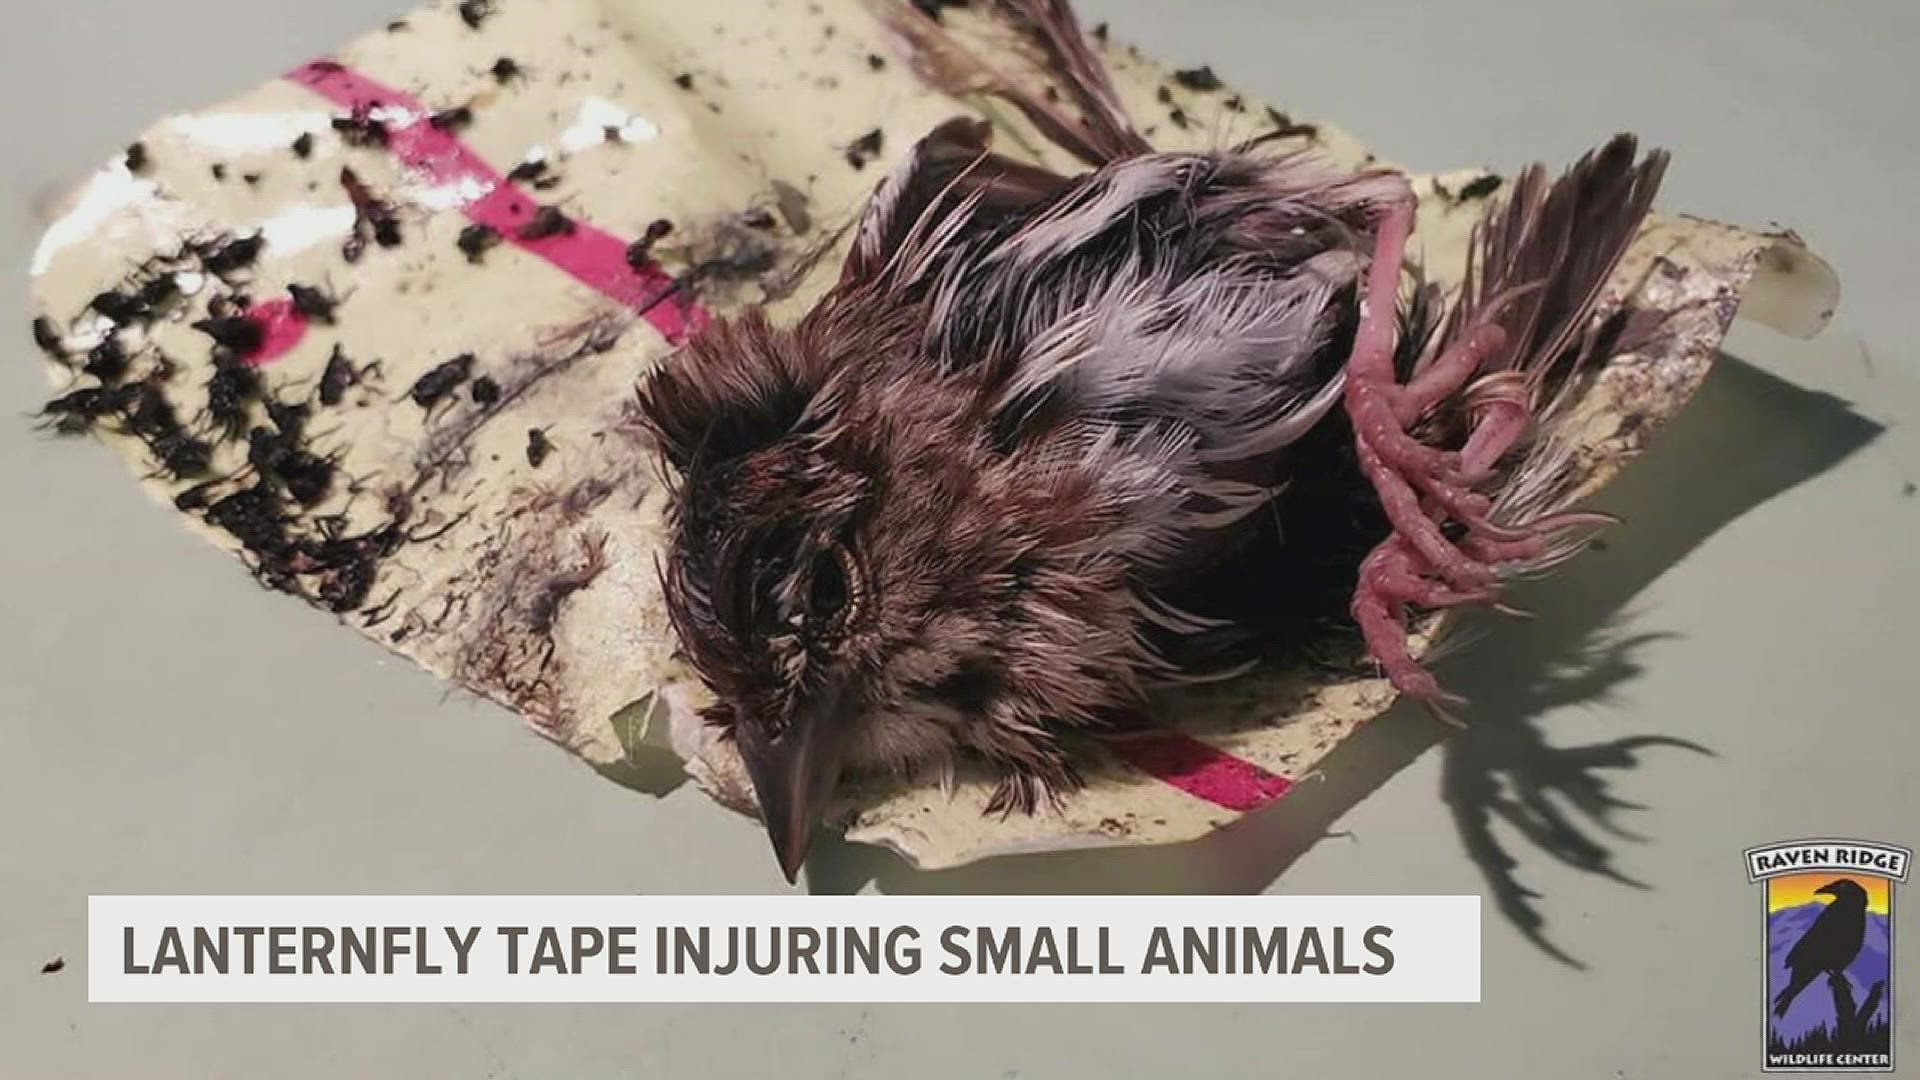 Small animals are getting stuck in lanternfly tape, causing them to get injured or even die.